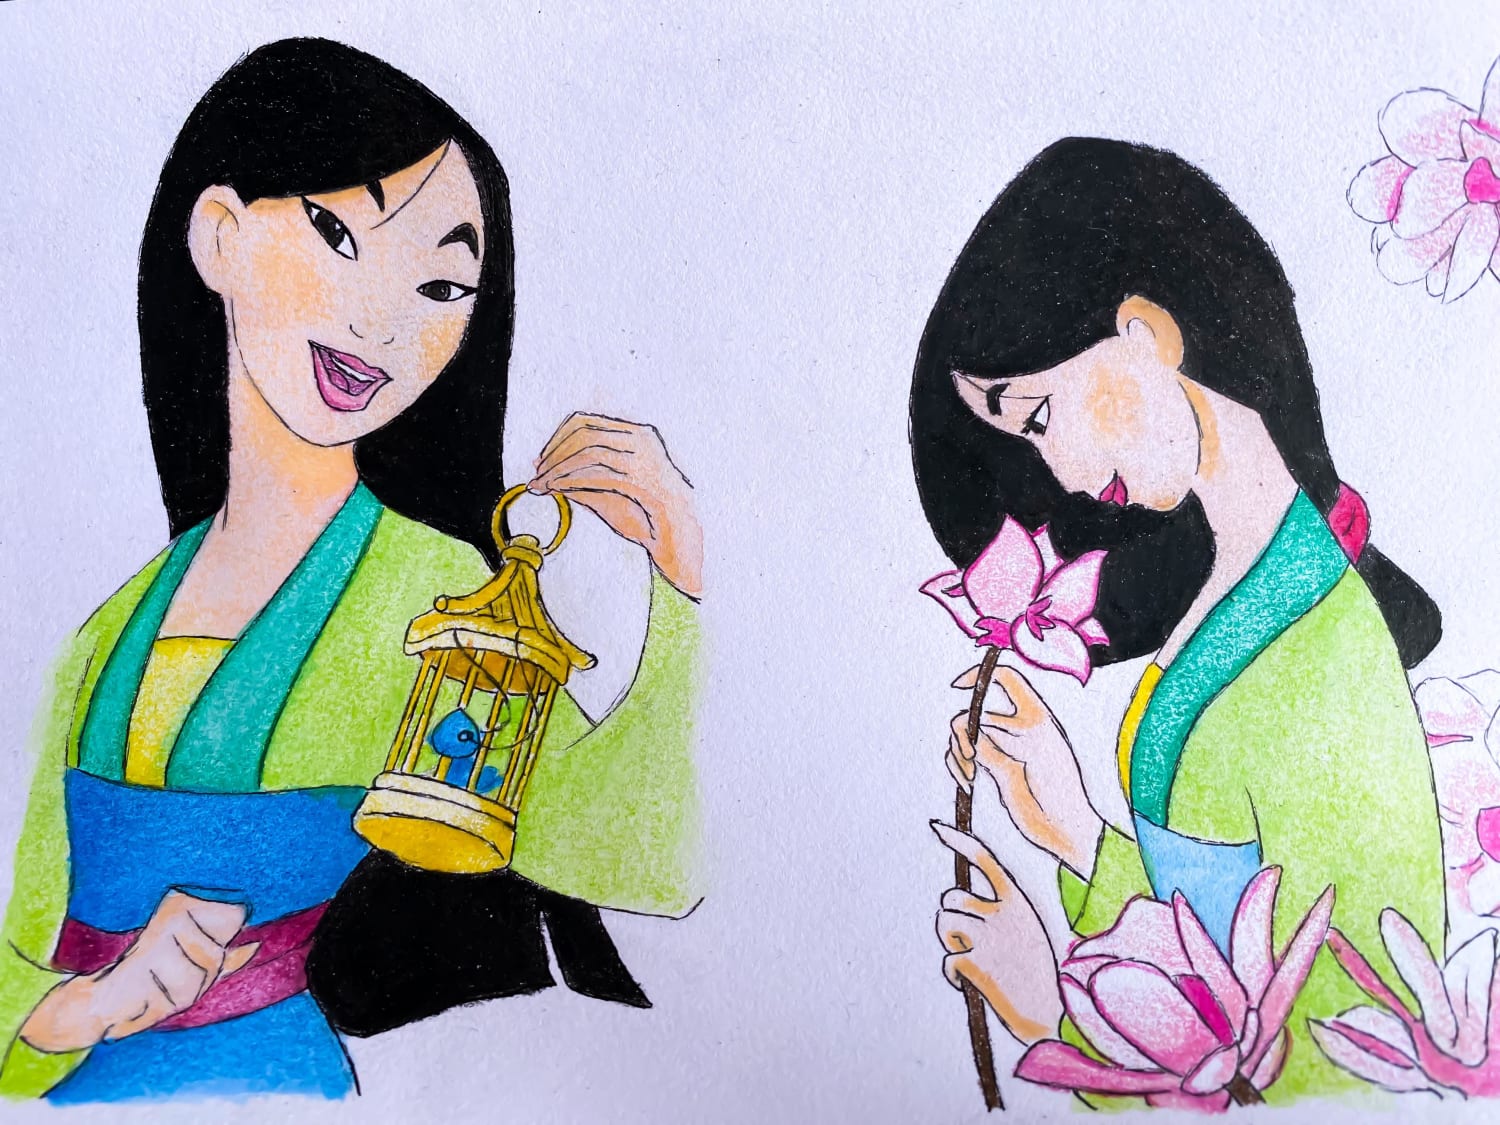 Trying to improve watercolors and pencils with a simple Mulan sketch, hope you like it